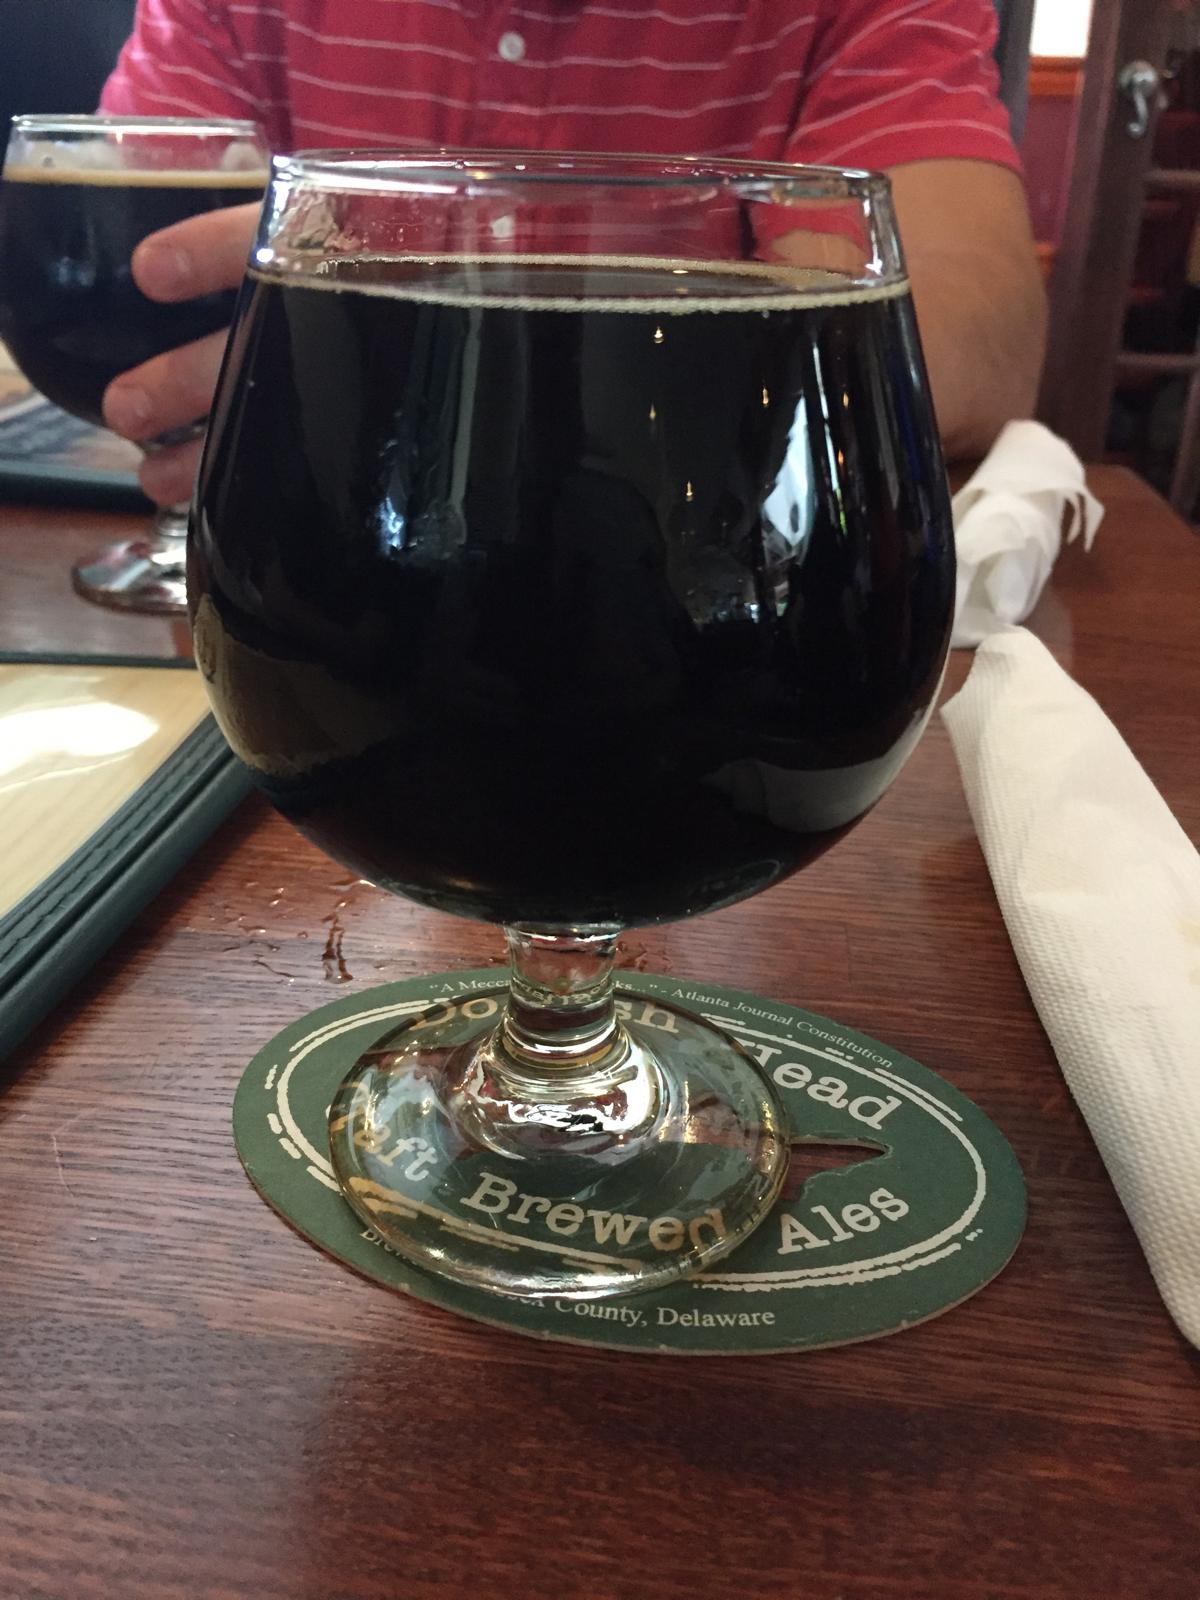 World Wide Stout with Vanilla